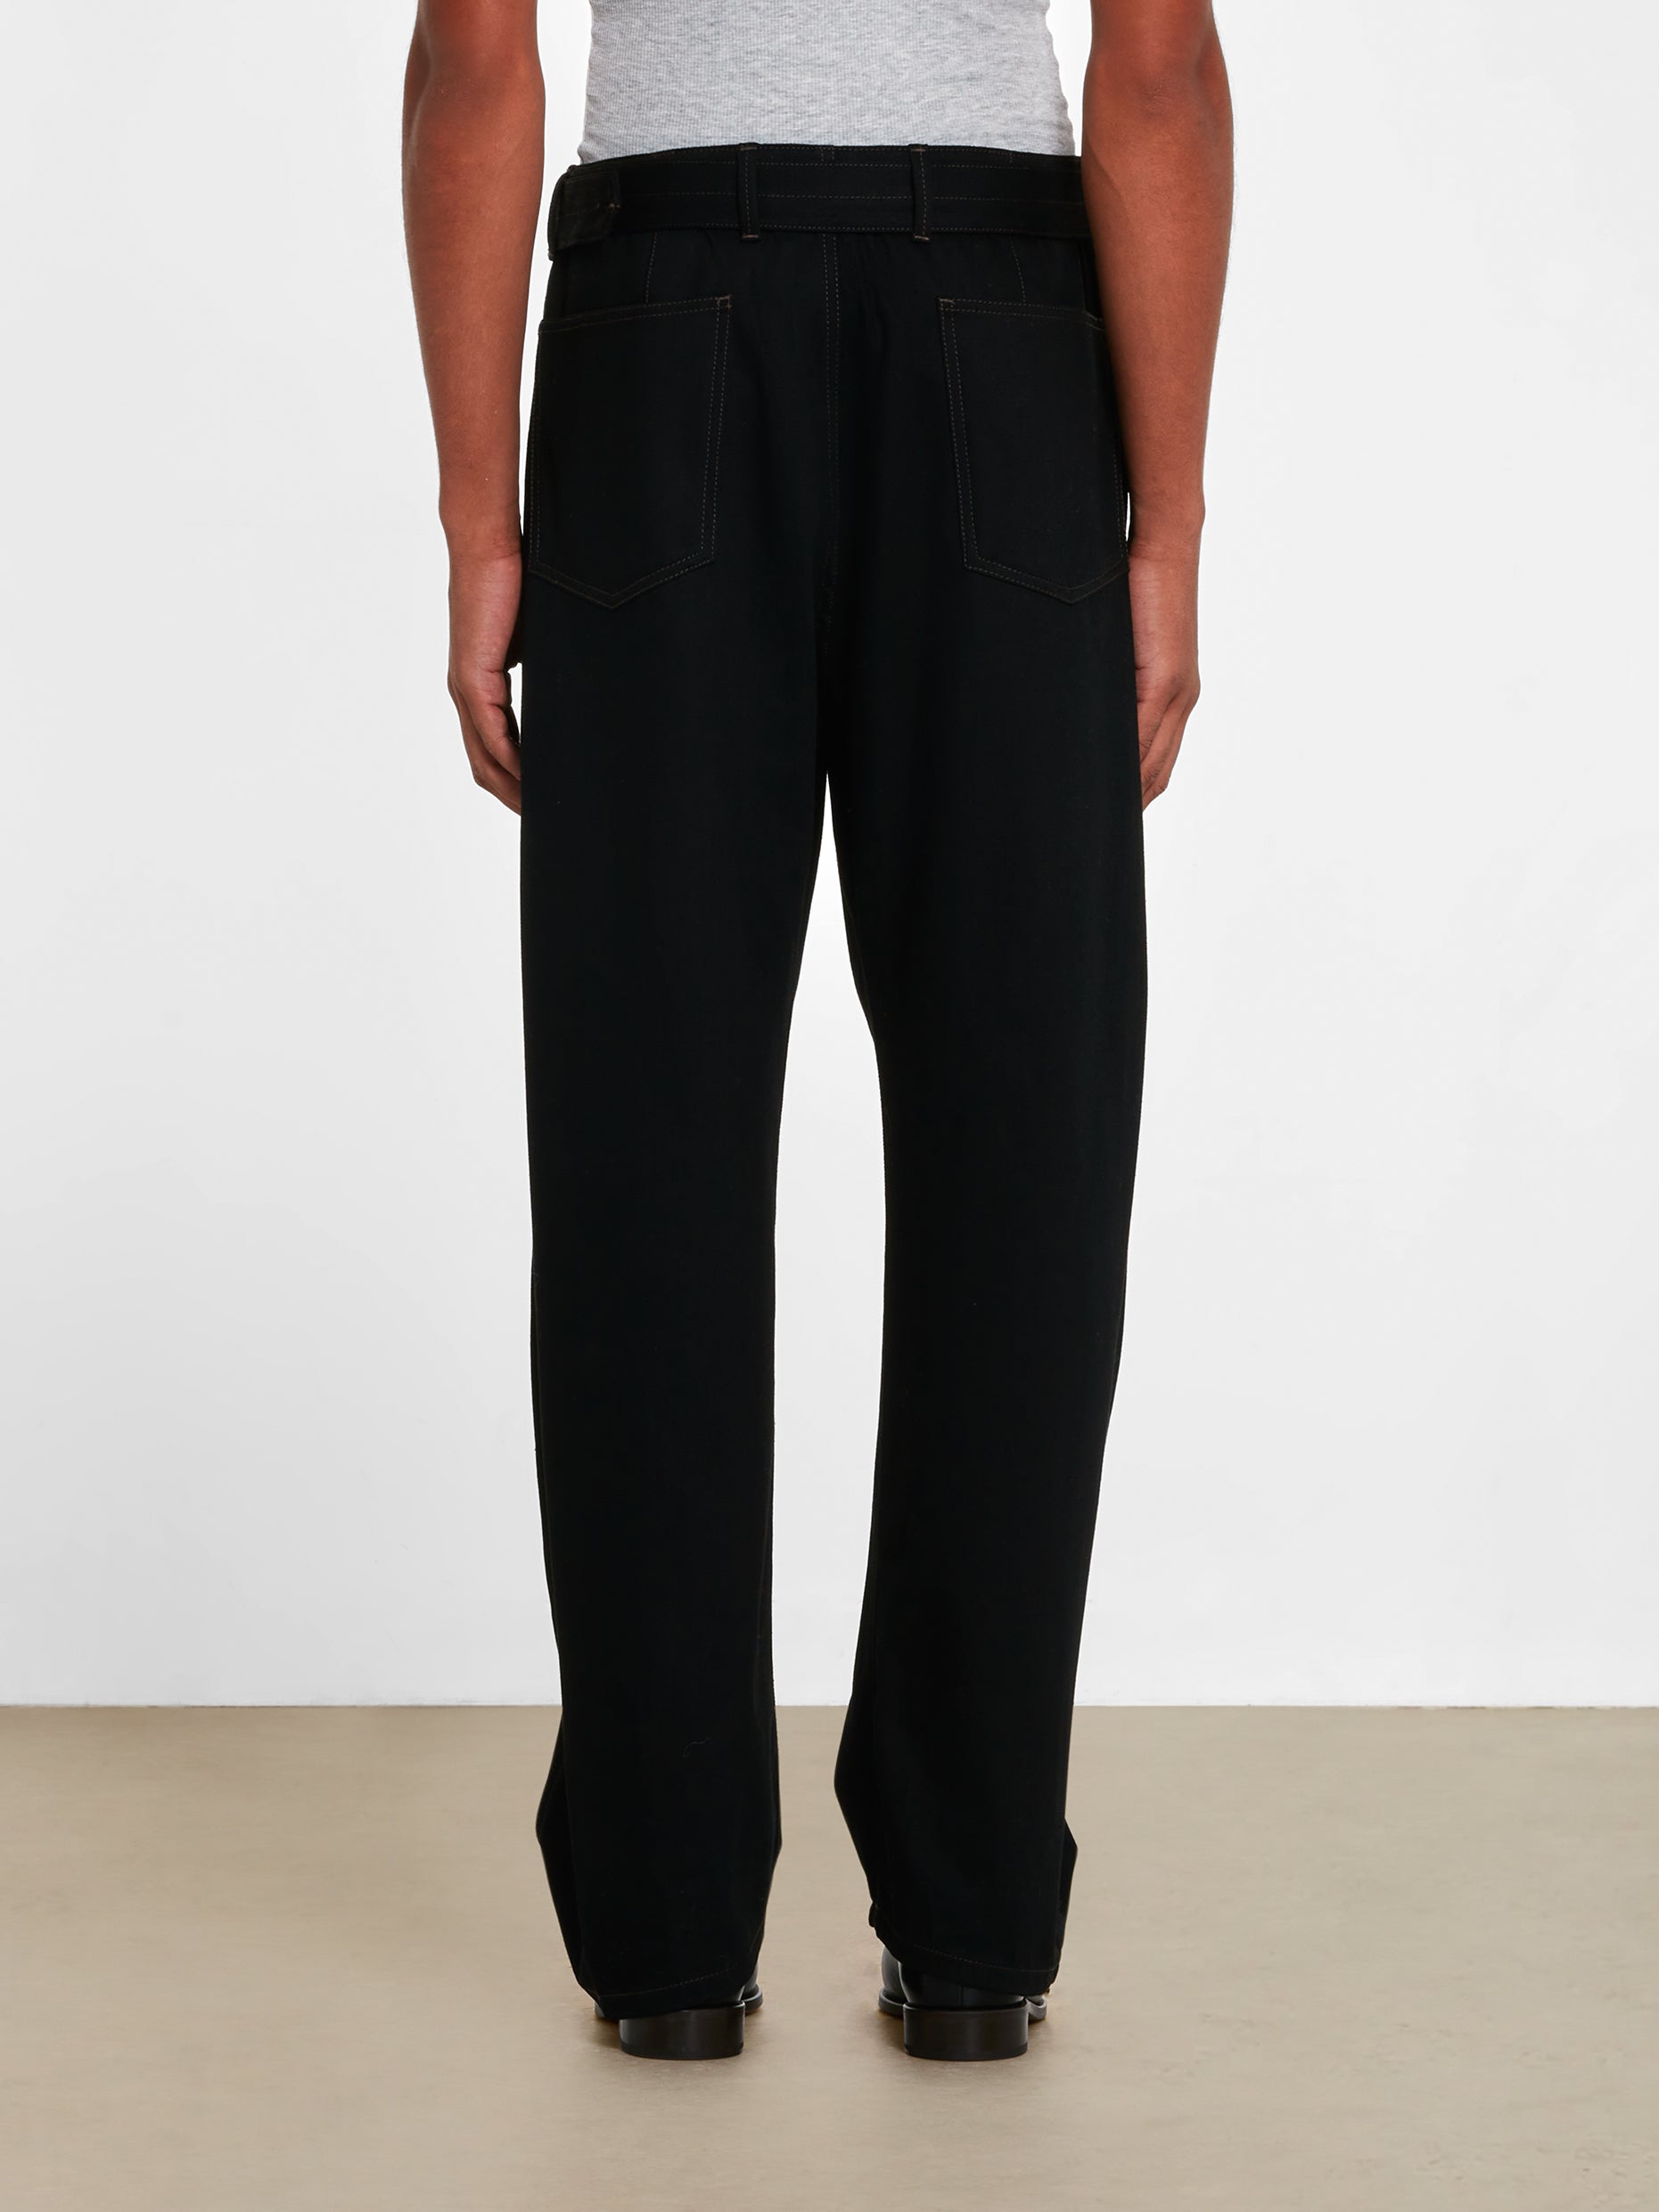 Lemaire - Men’s Twisted Belted Pants - (Black) view 3